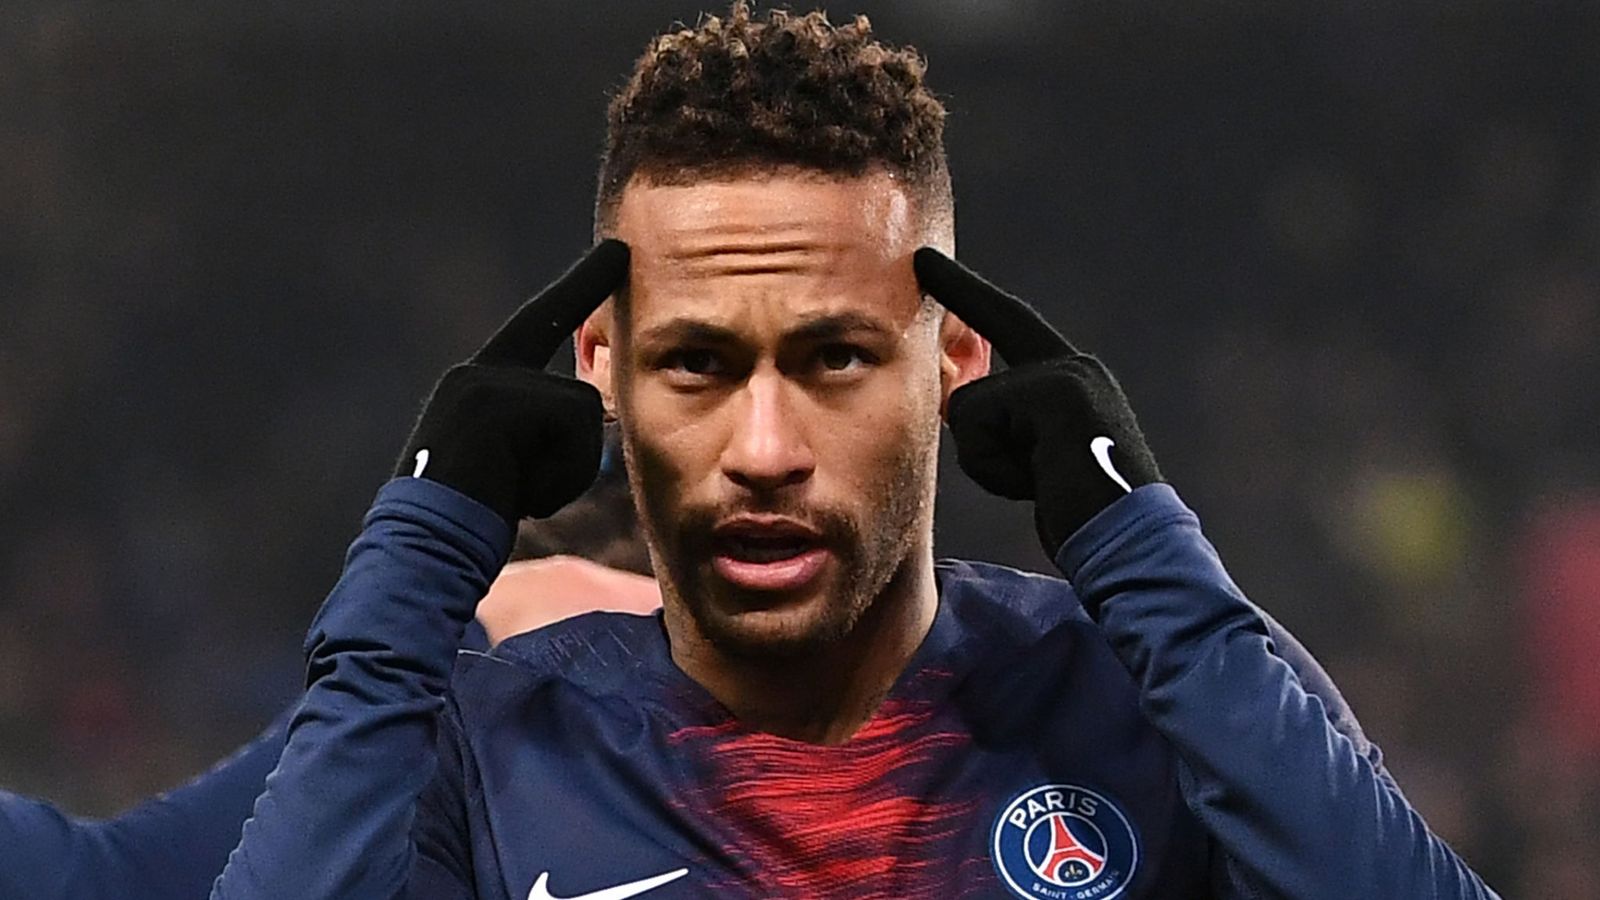 PSG set to lower asking price for Neymar as coach urges team to sell the wantaway winger - Bóng Đá